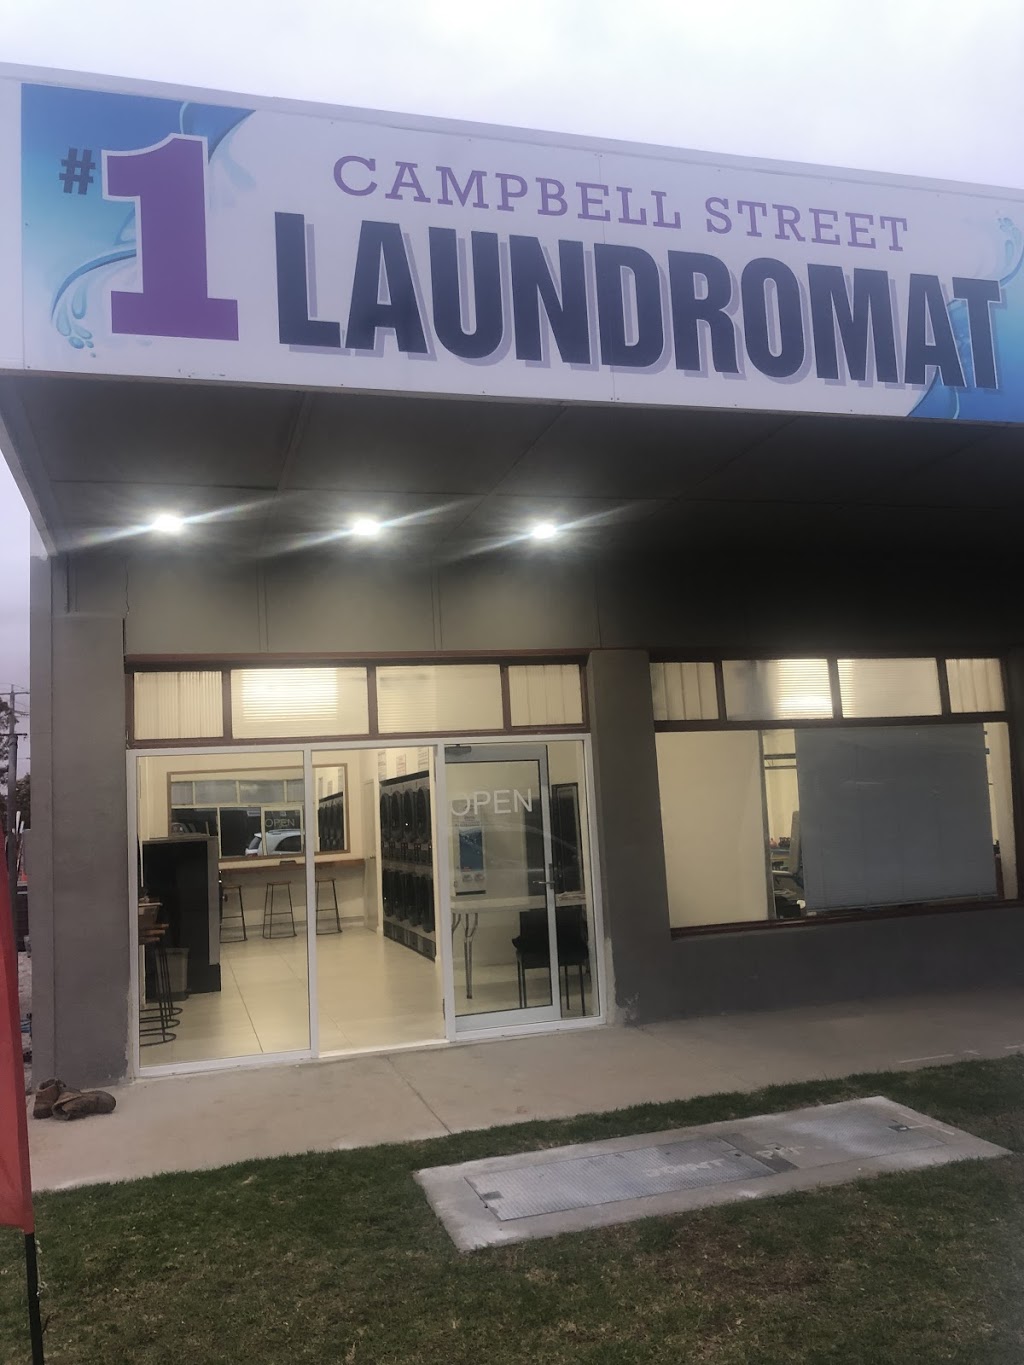 #1 Campbell Street Laundromat | laundry | 1 Campbell St, Swan Hill VIC 3585, Australia | 0468800378 OR +61 468 800 378